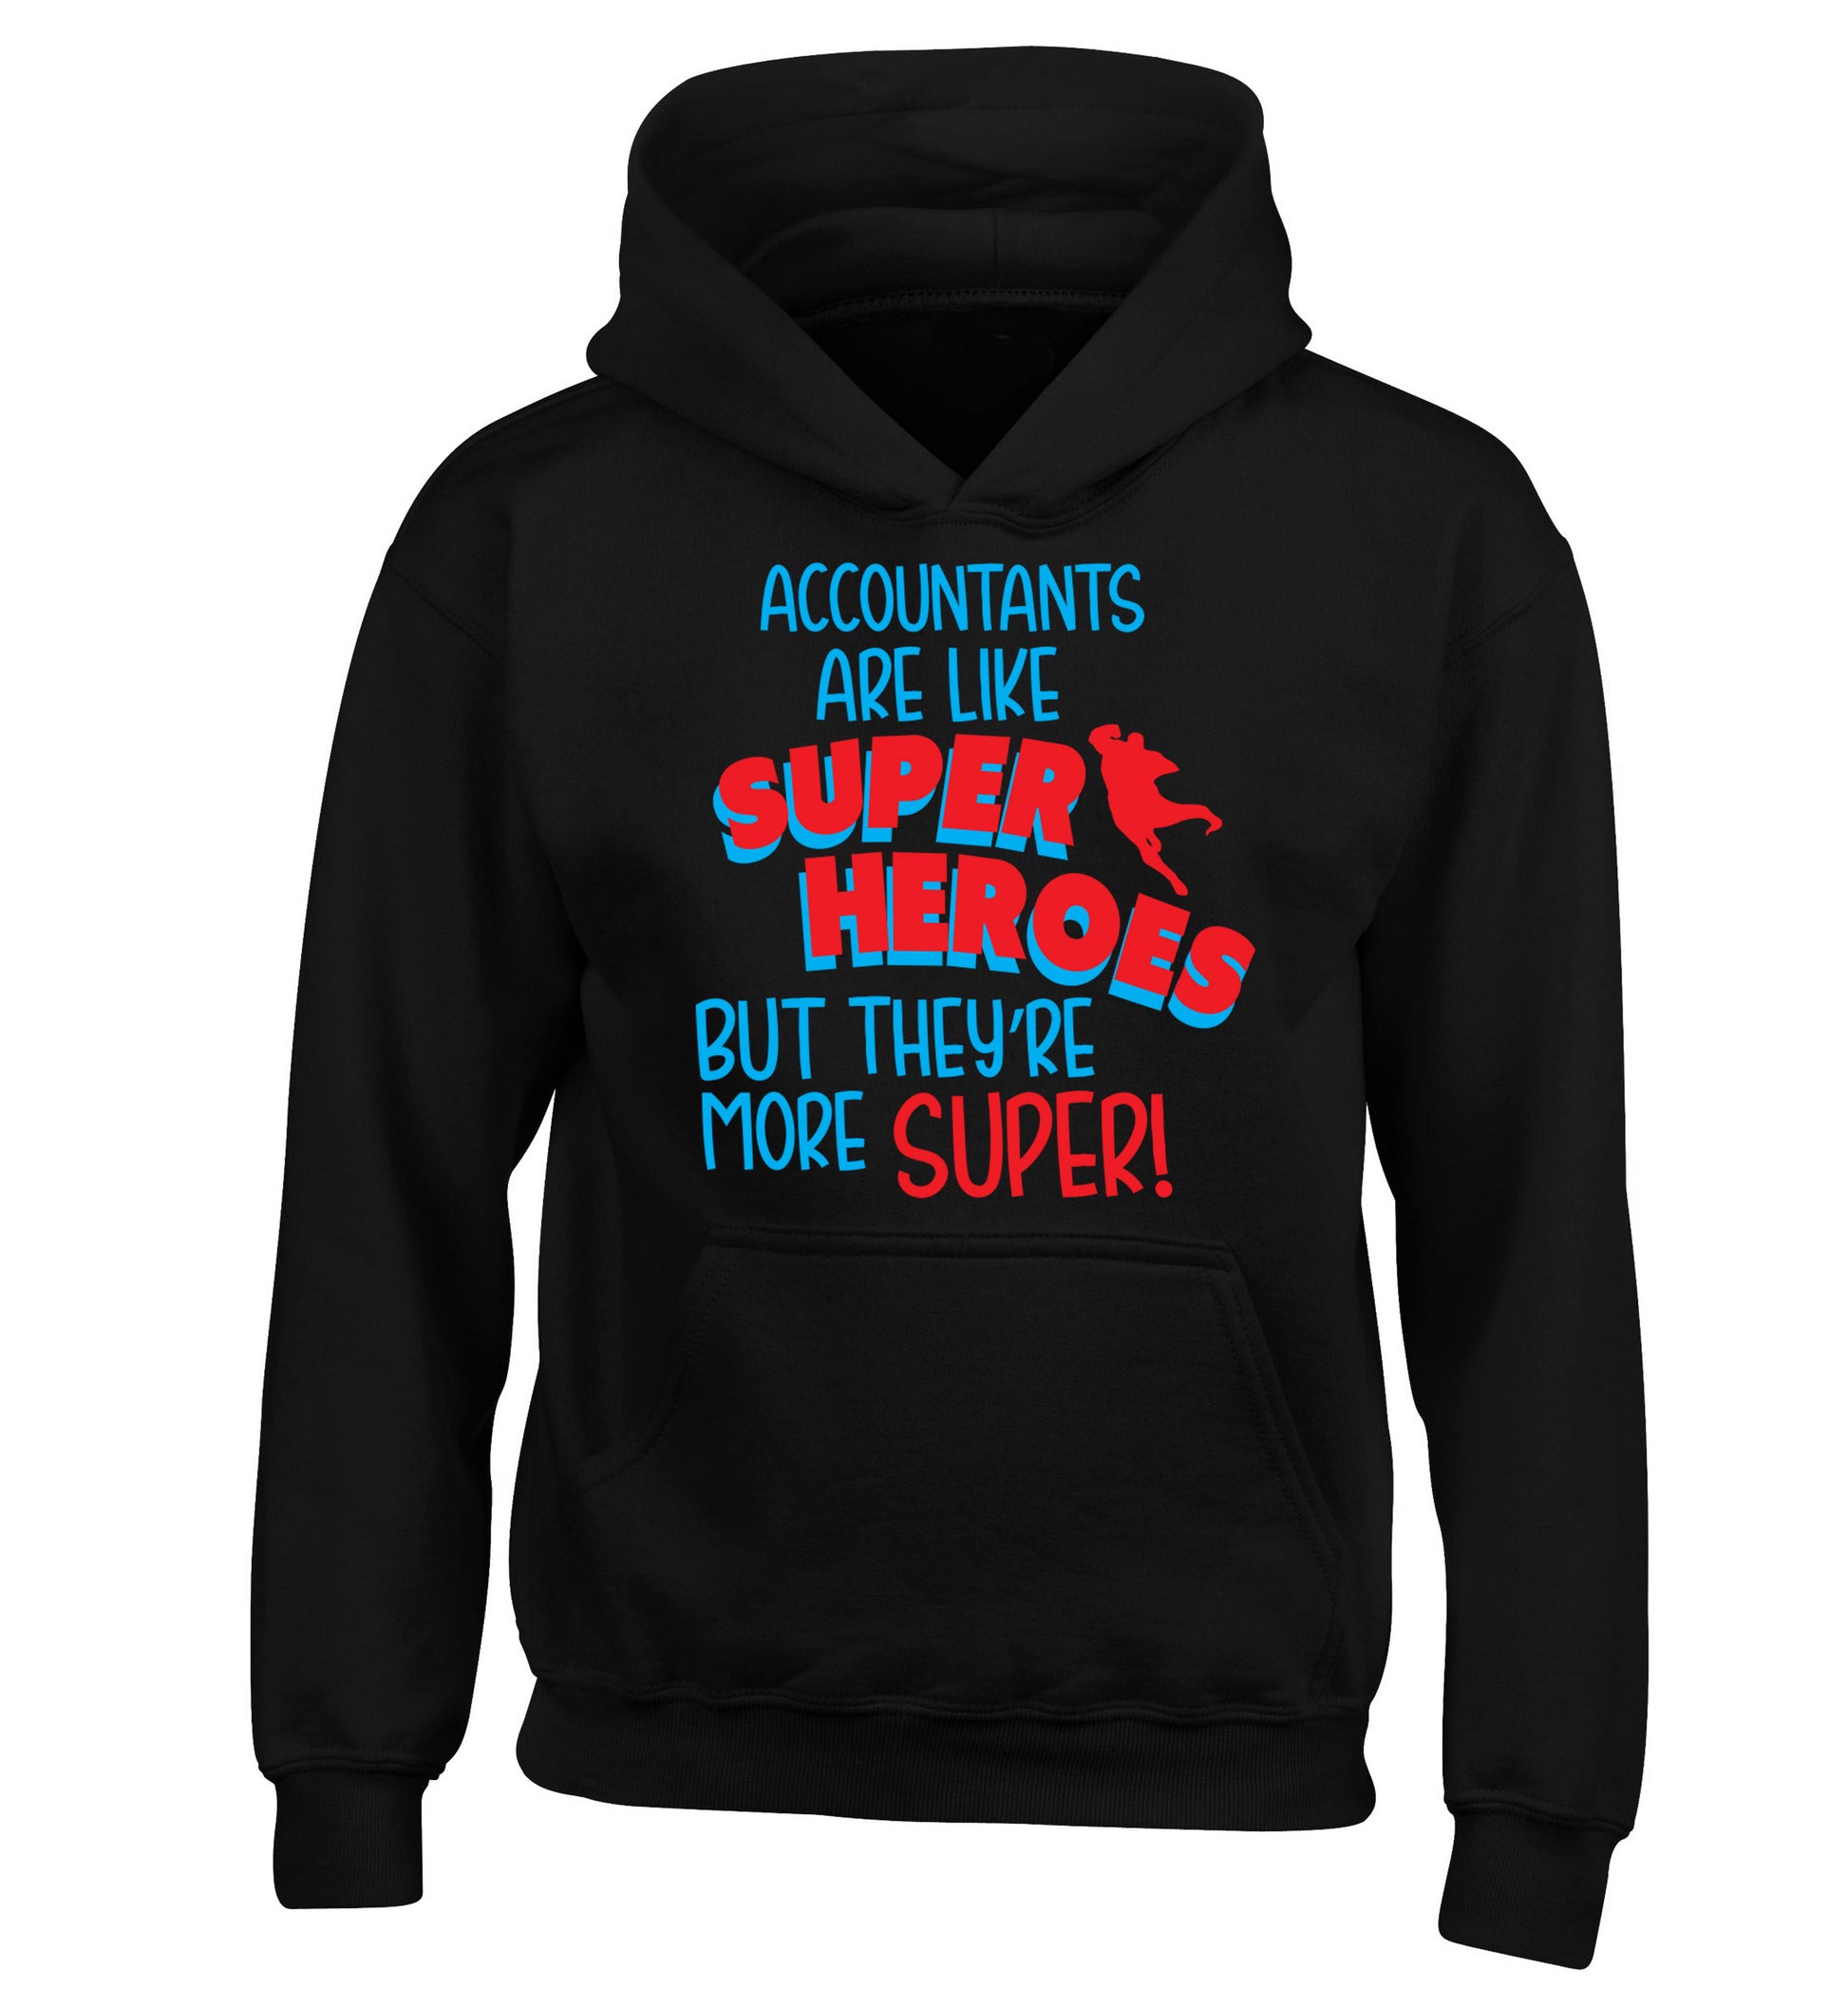 Accountants are like superheroes but they're more super children's black hoodie 12-13 Years